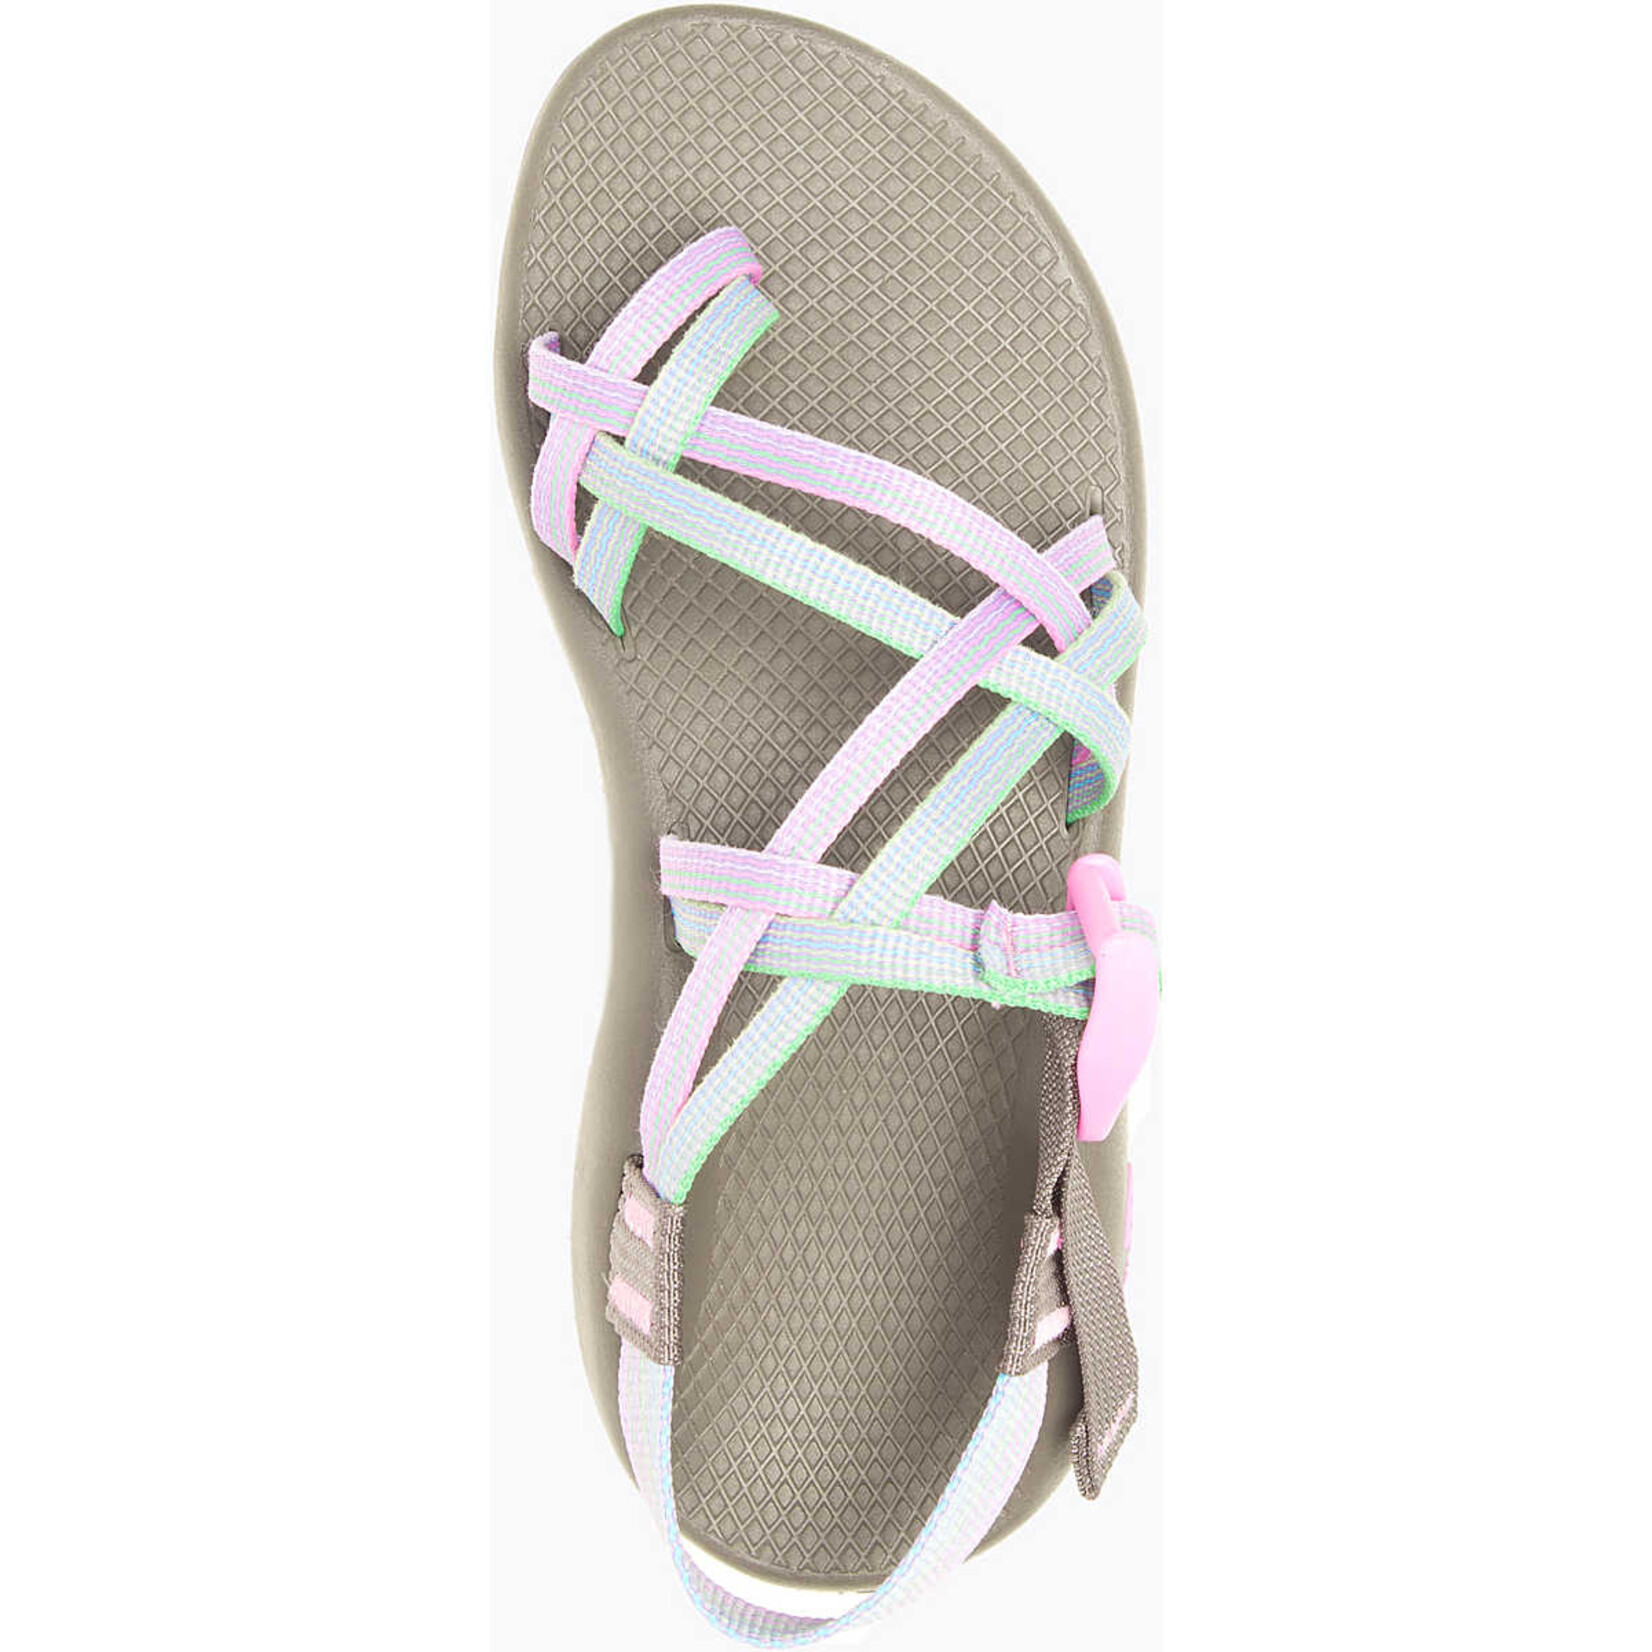 Chaco Chaco Women's ZX/2® Classic Sandals